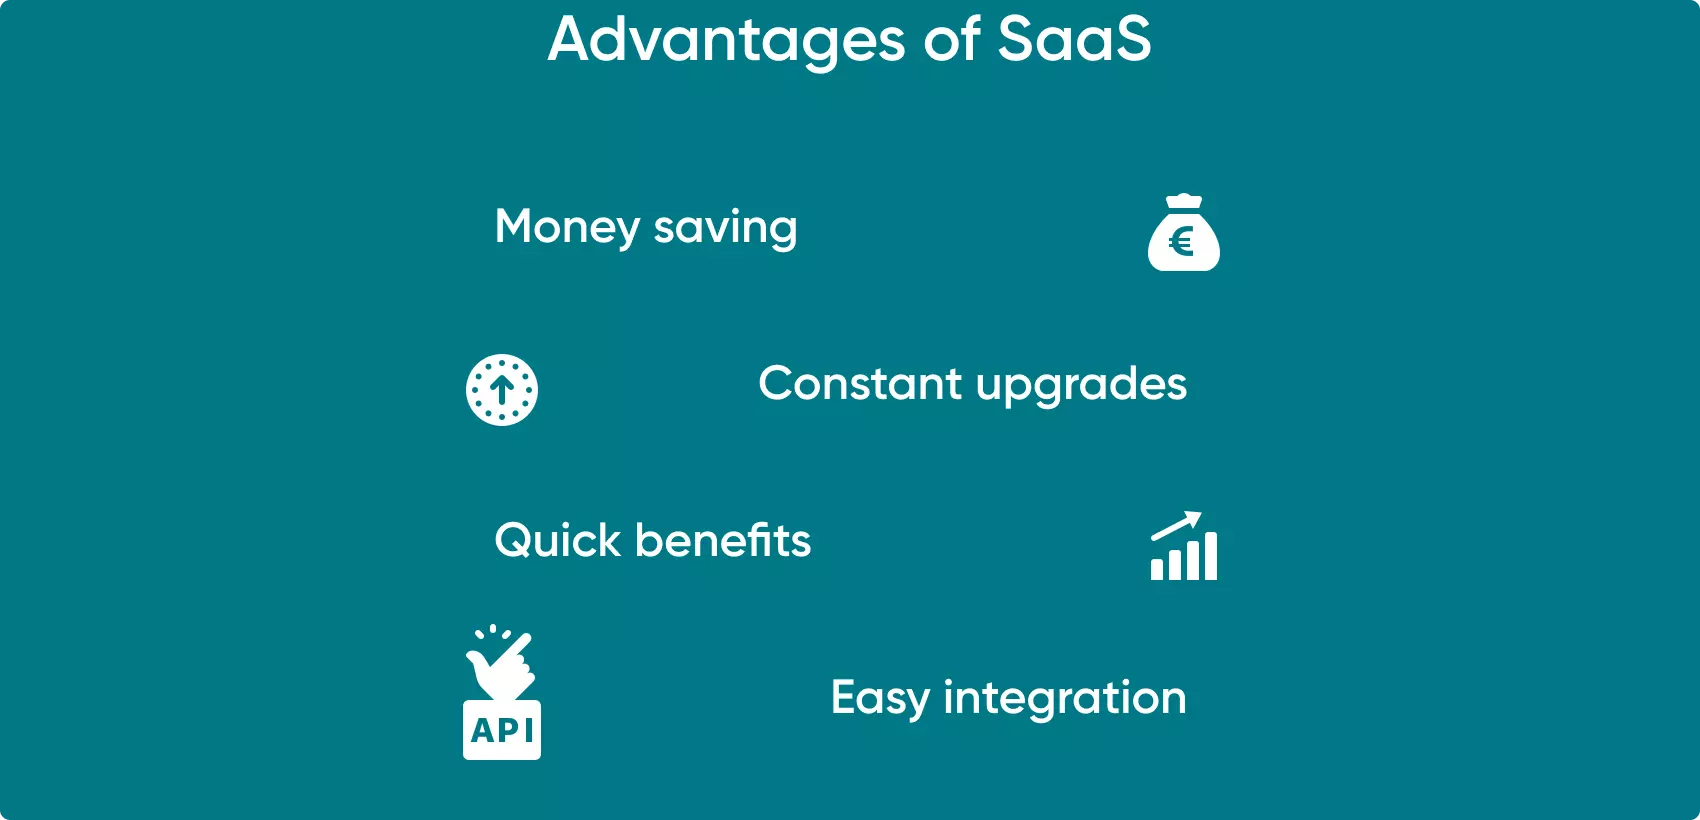 SaaS is a budget-friendly and adaptasble service, offering the possiblity of expansion and worldwide access. It is also easily integrated with other services.